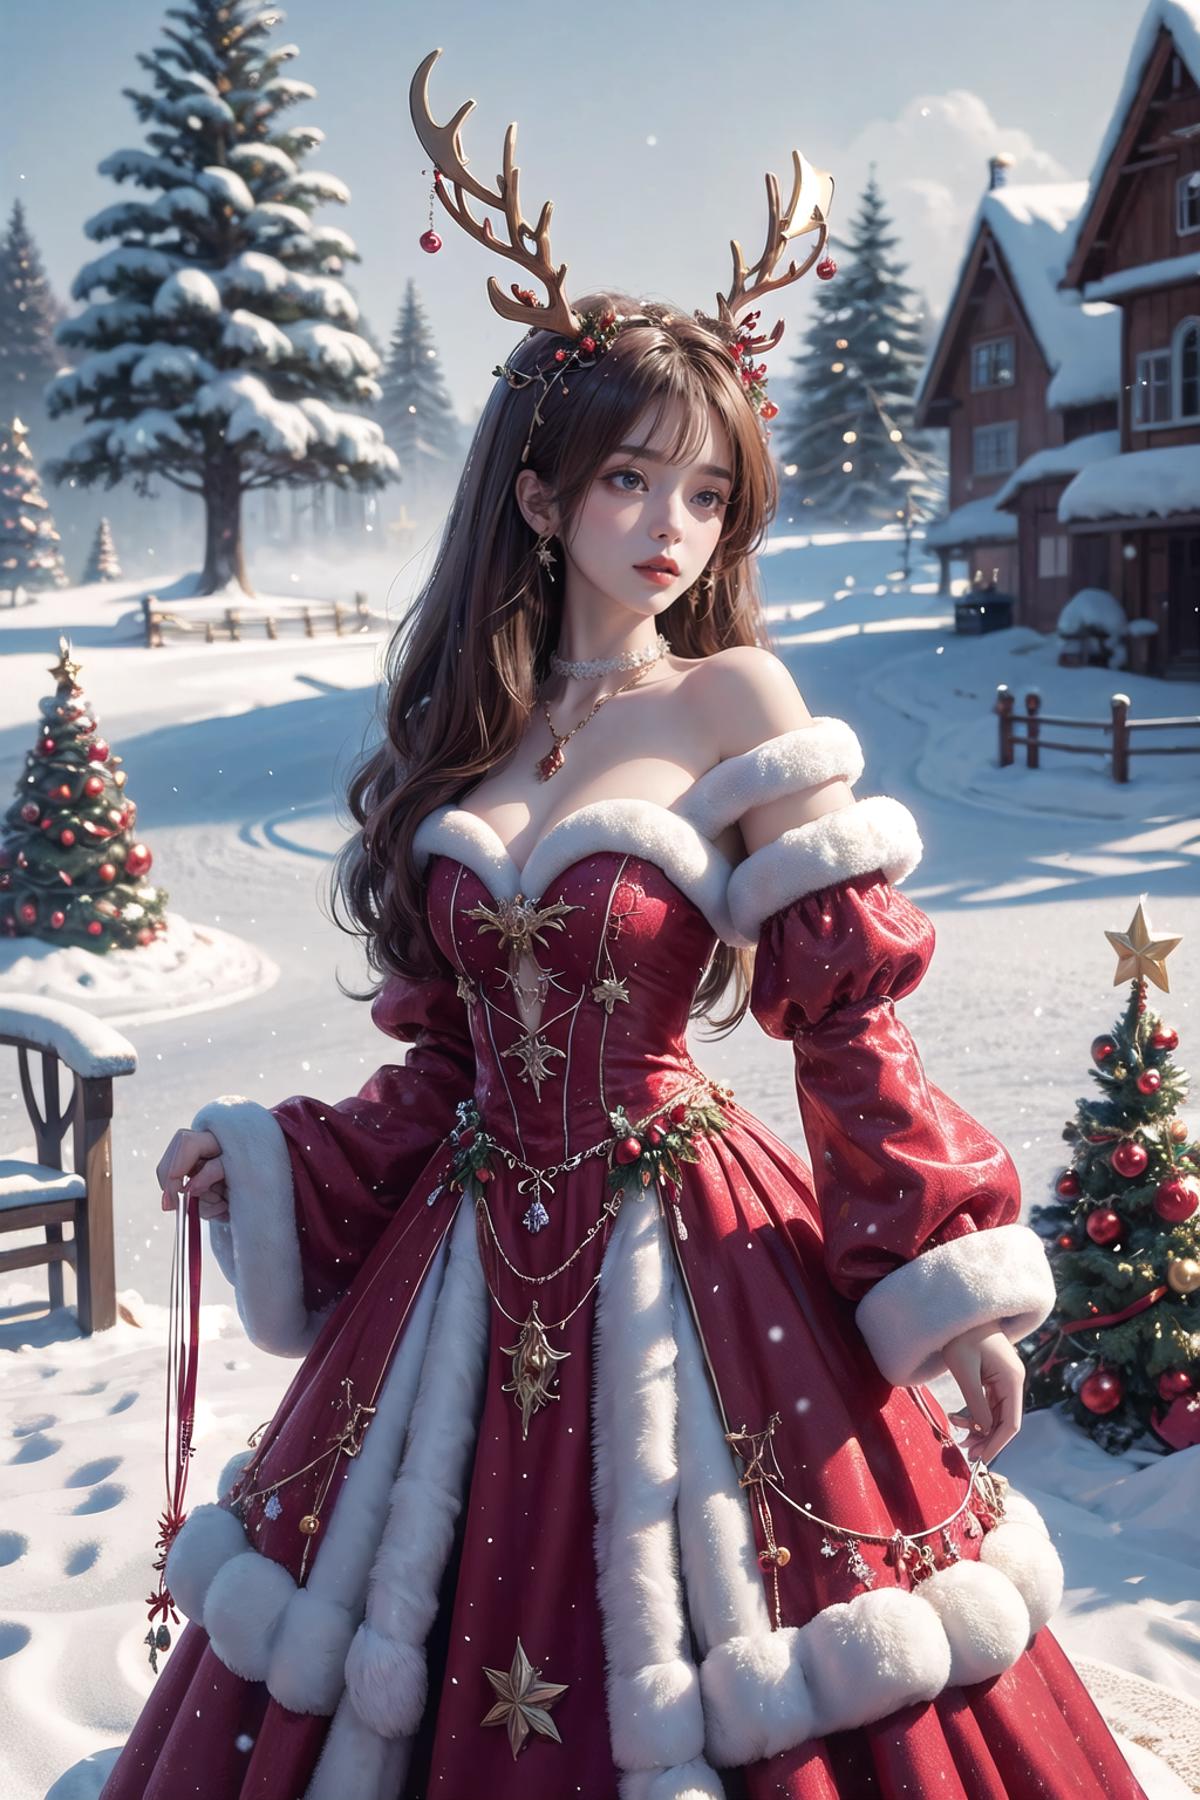 A 3D animated image of a woman in a Santa dress standing in the snow.